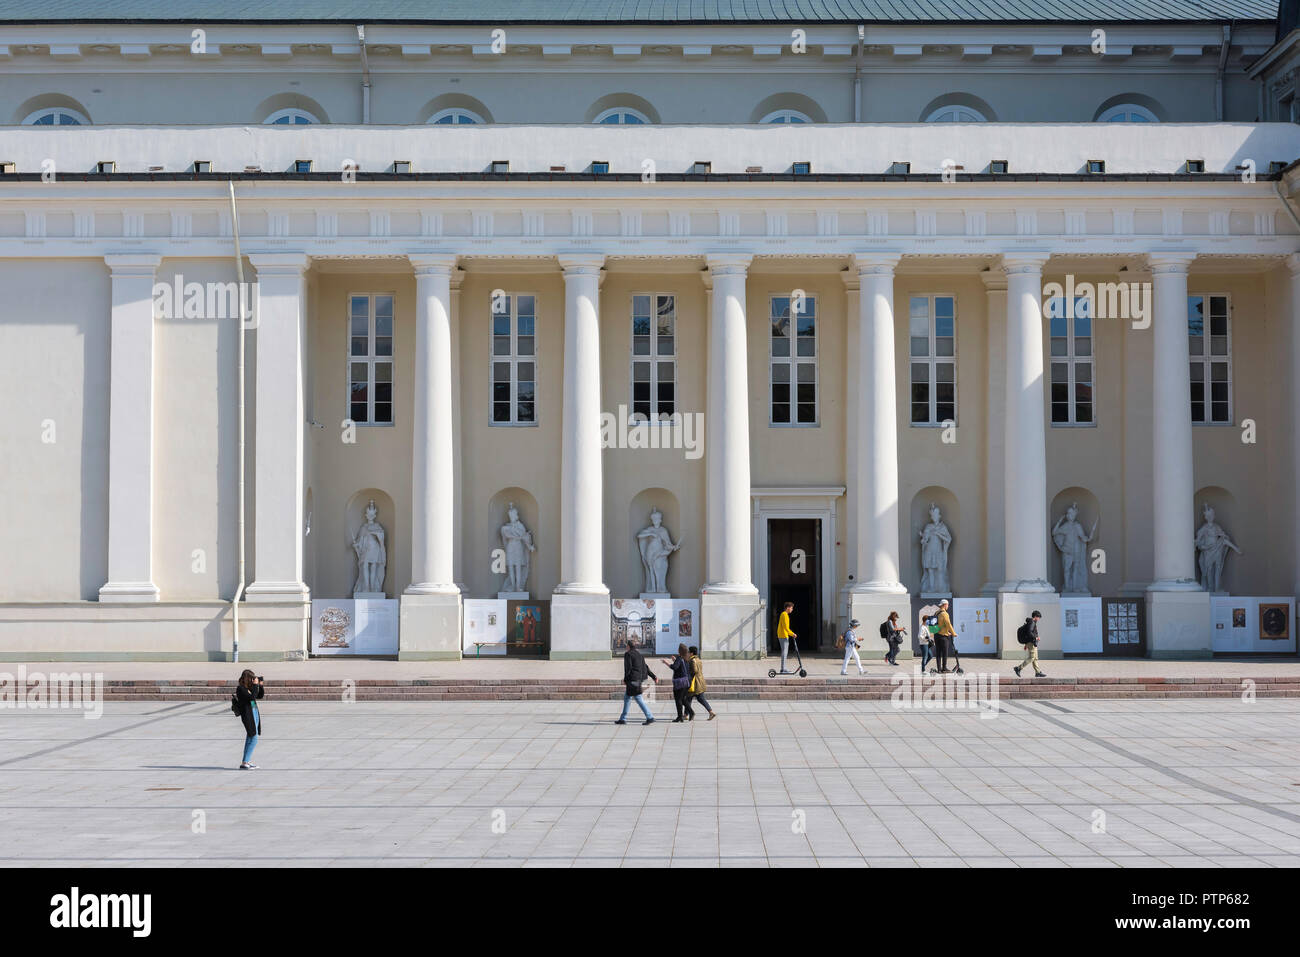 Vilnius Cathedral Square, view of people walking in Cathedral Square against the backdrop of the cathedral's neoclassical columns, Vilnius, Lithuania. Stock Photo